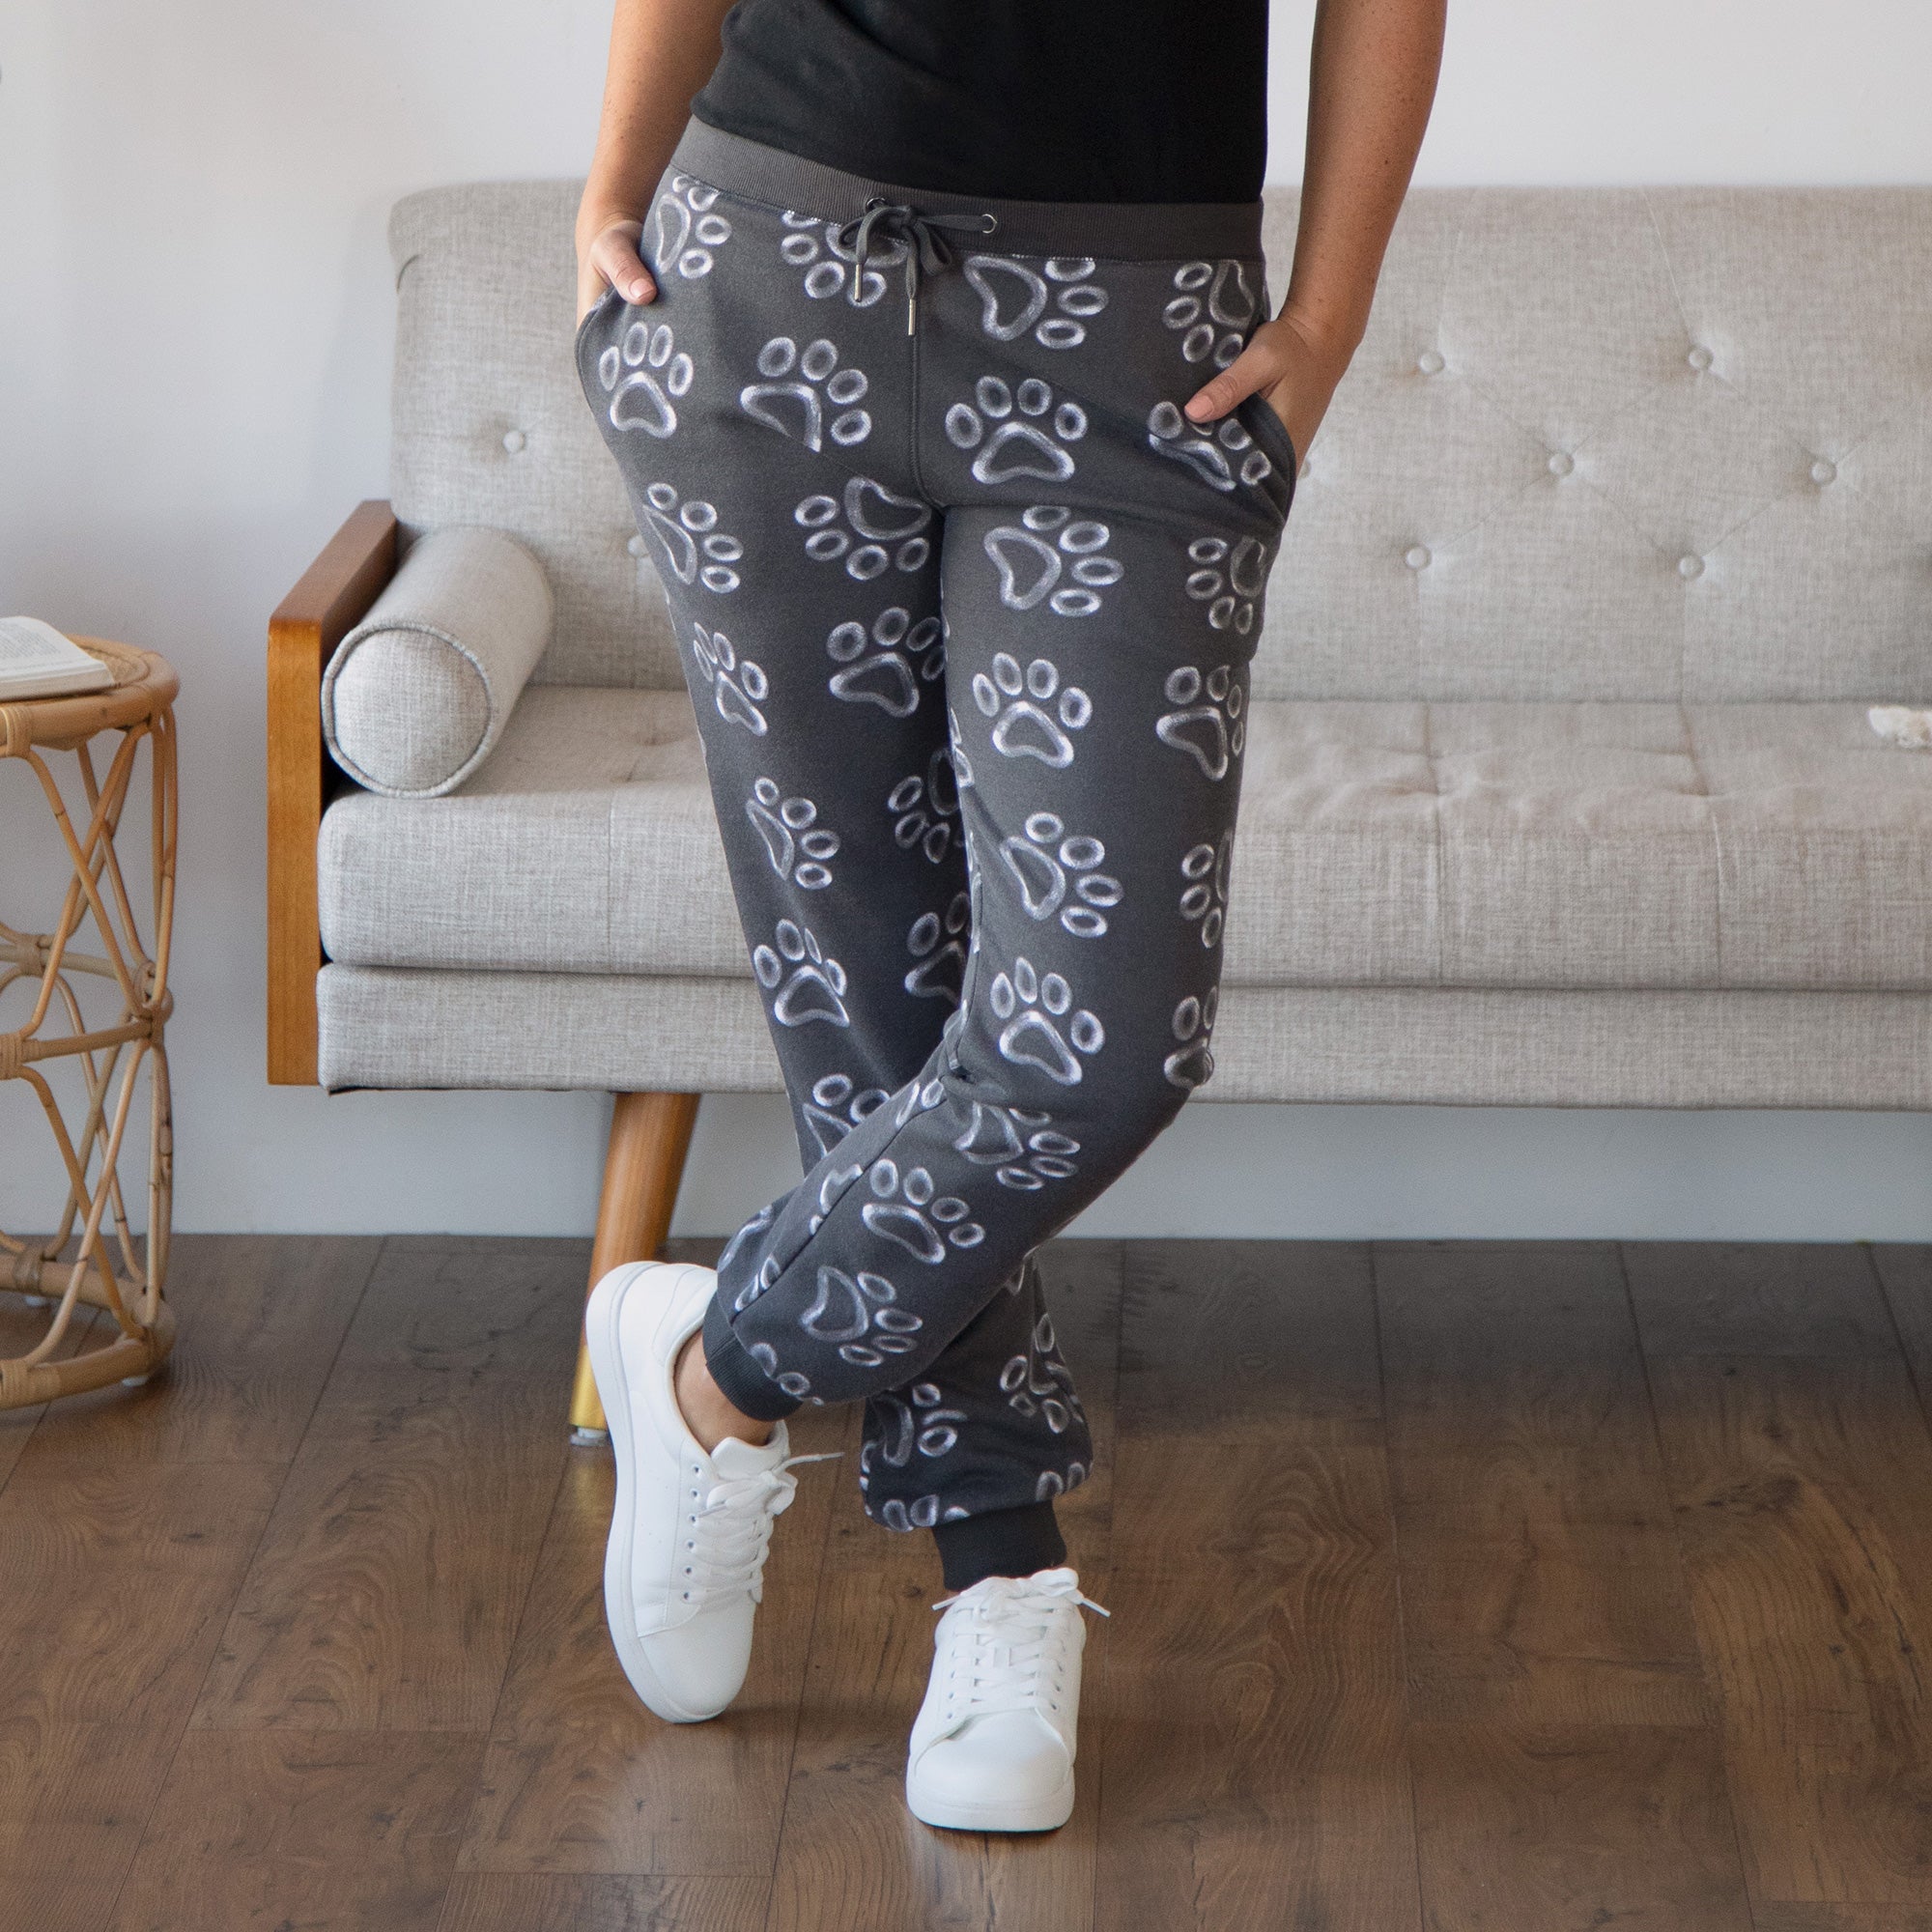 All Over Chalk Paw Sweatpants - 2X